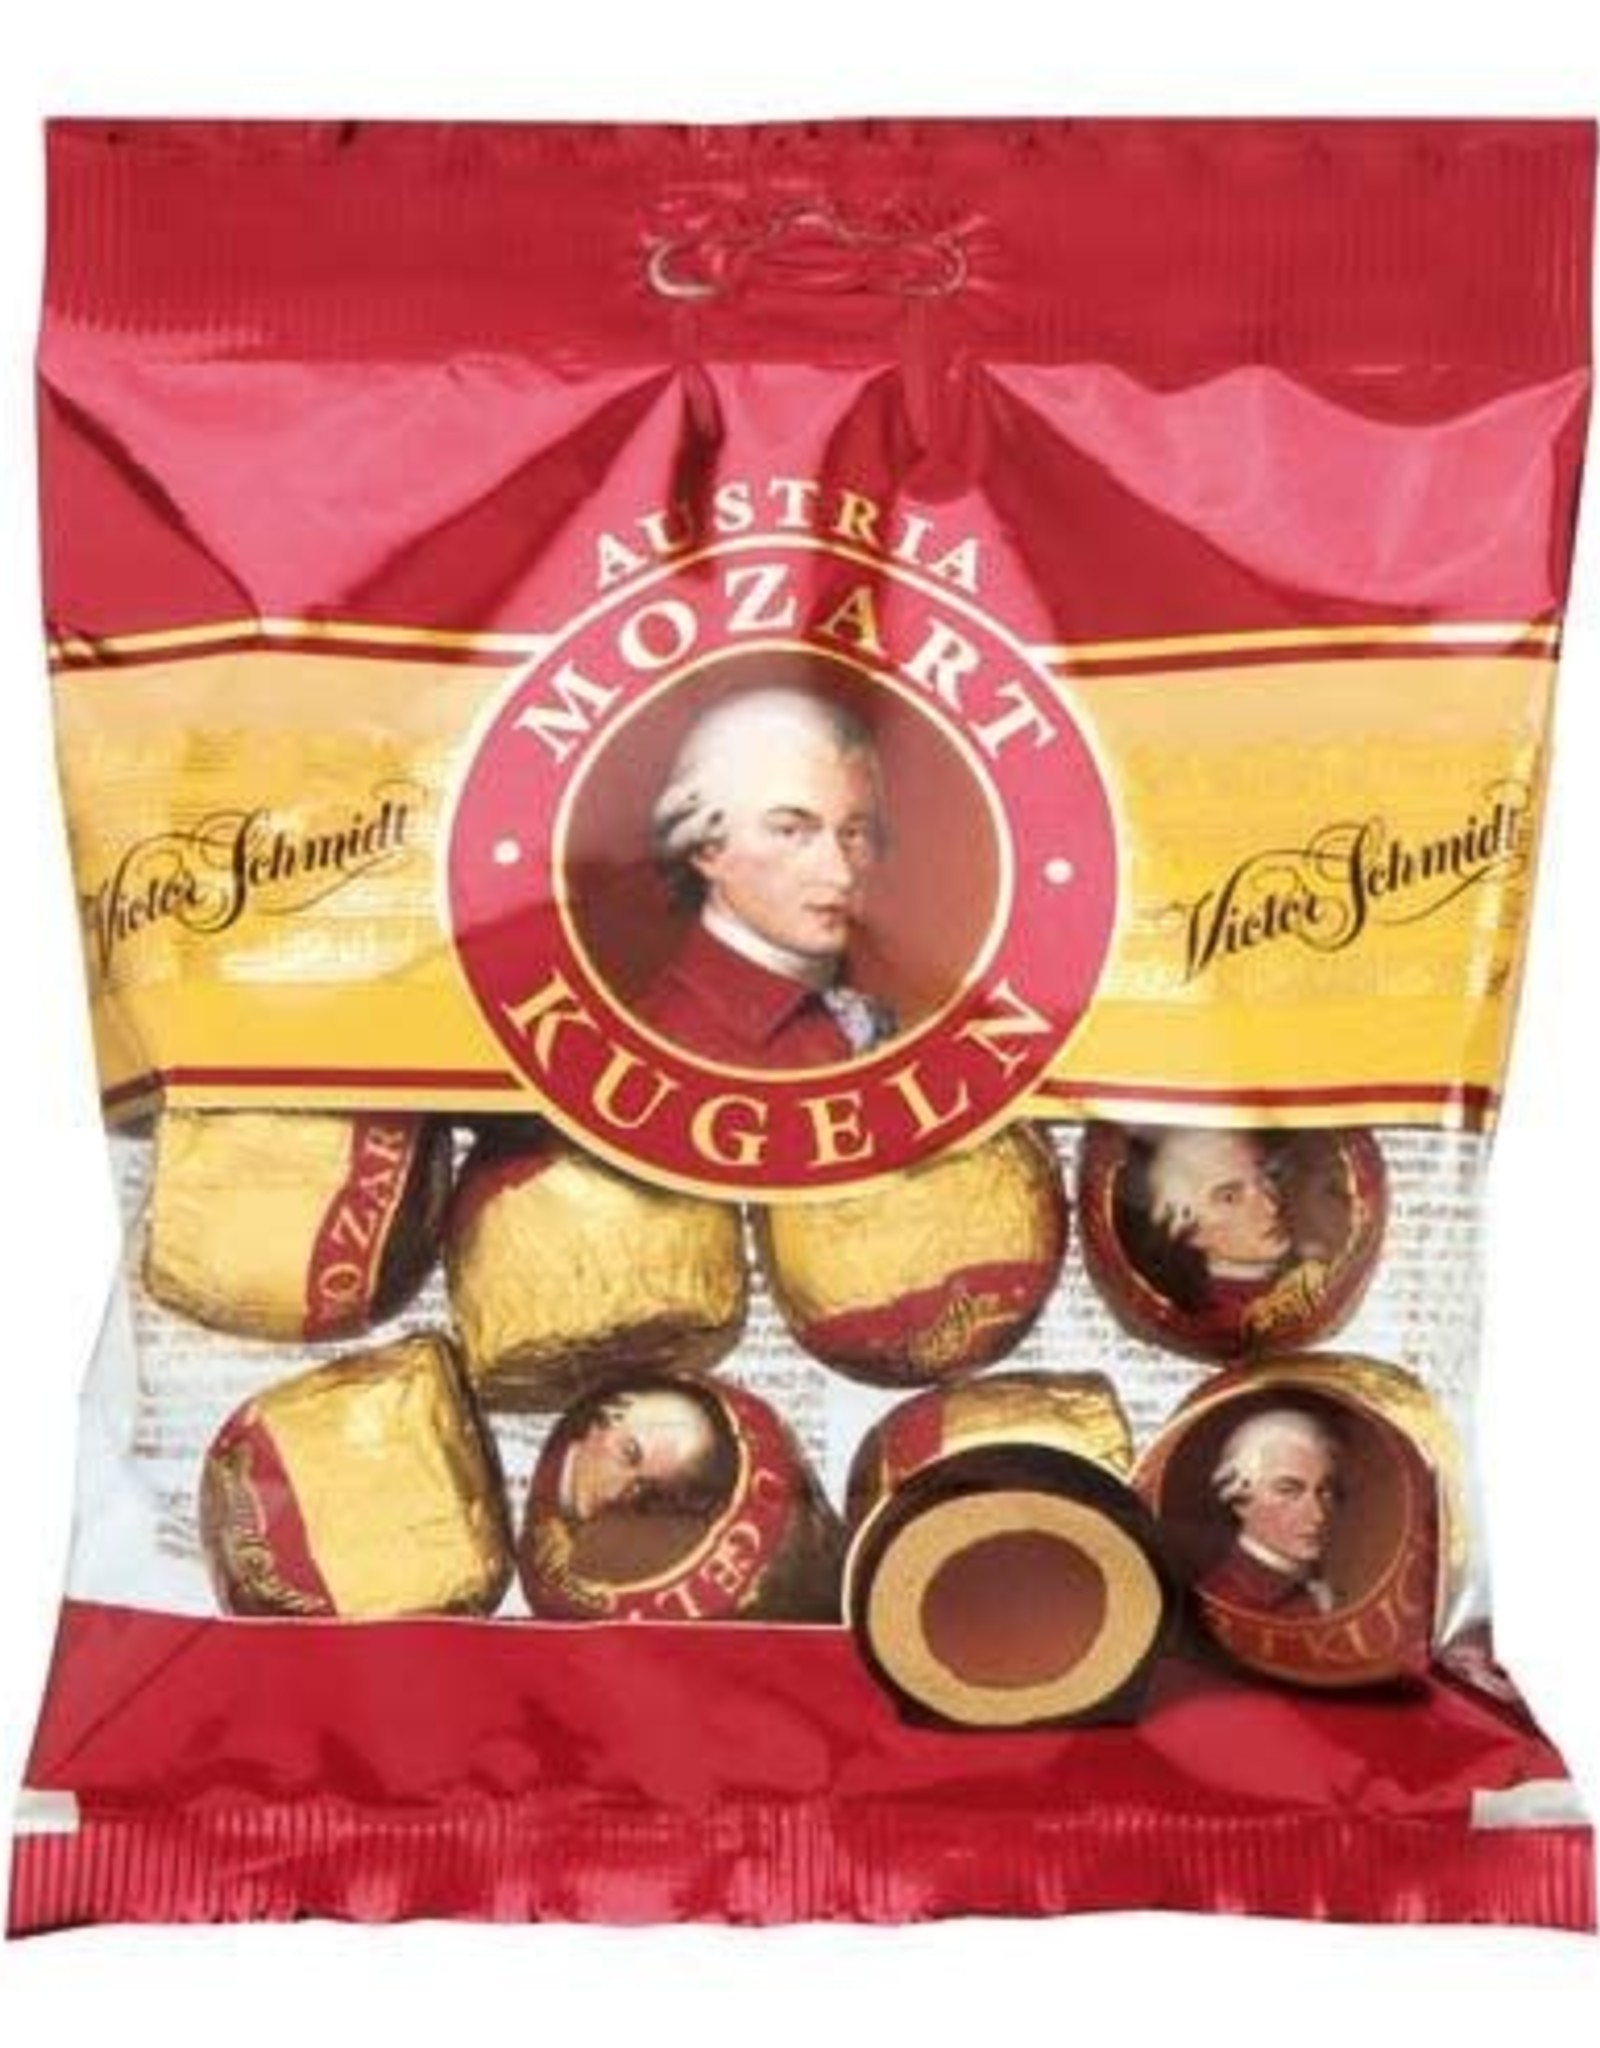 Norget & Co Holiday Treats - Mozartkugeln Cello